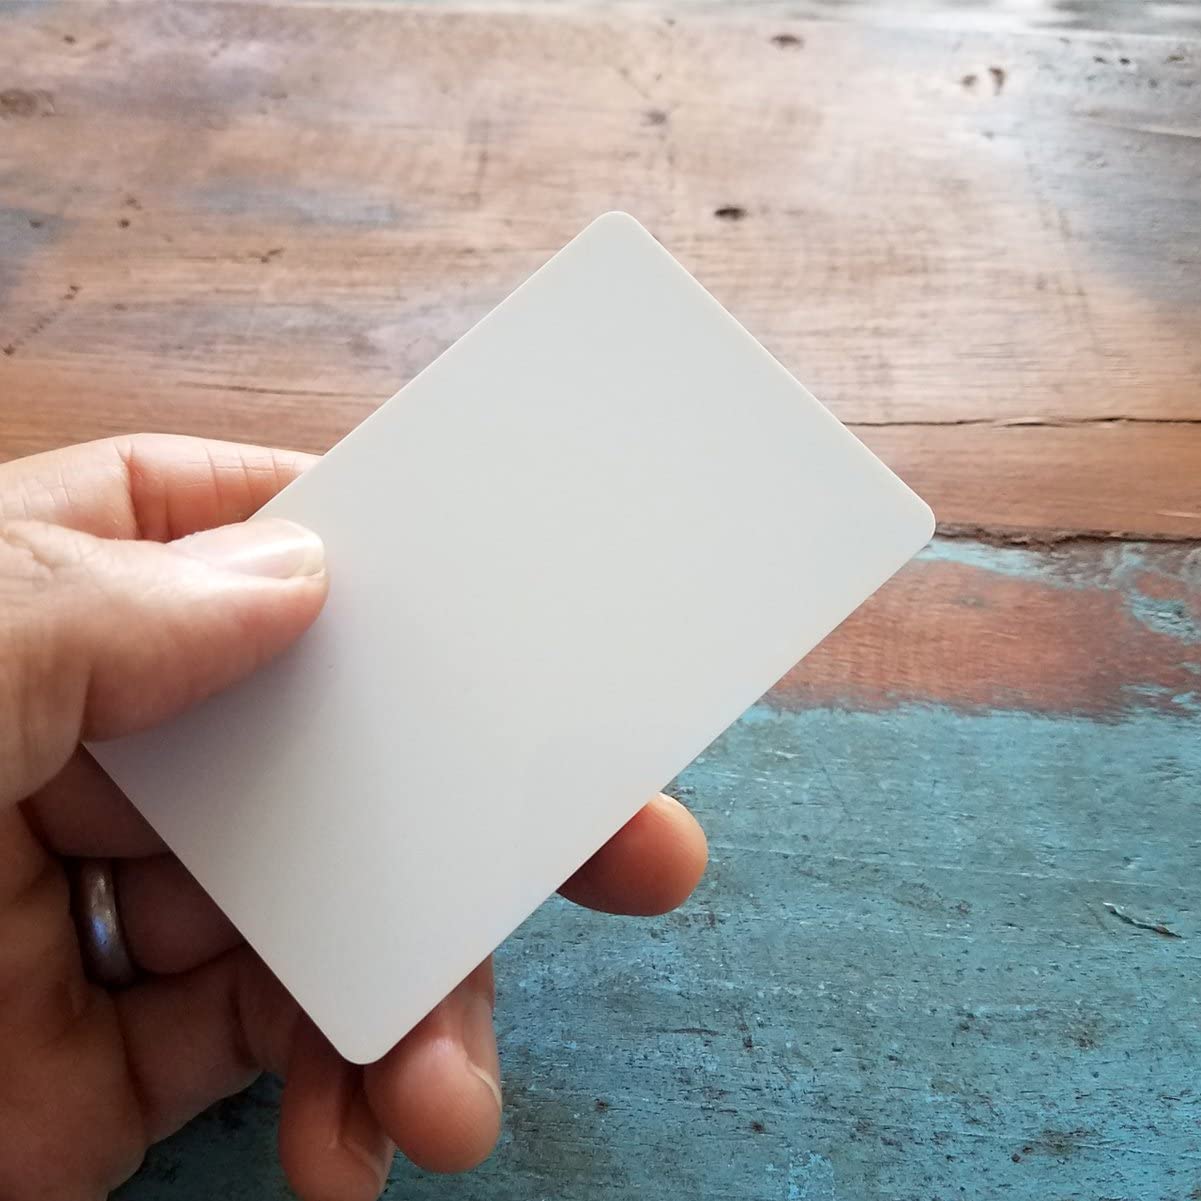 A hand holding a blank white card, perfect for Premium Blank PVC Cards for ID Badge Printers - Graphic Quality CR80 30 Mil (CR80) used in employee ID badges, against a background of wooden table with worn blue and brown paint.